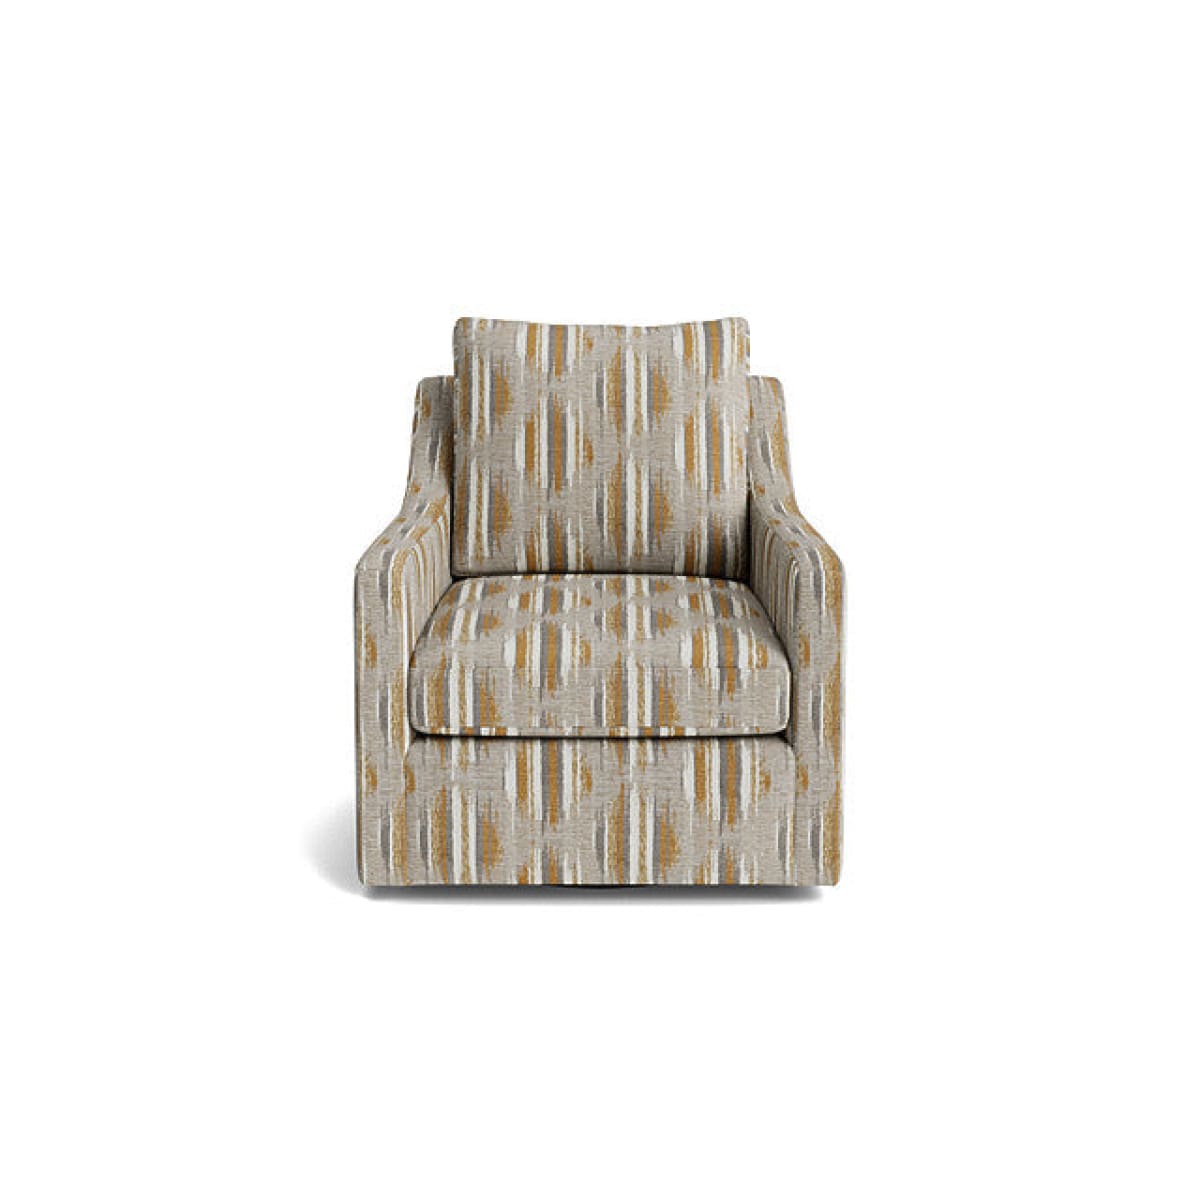 Grove Accent Chair - Kenzo Harvest